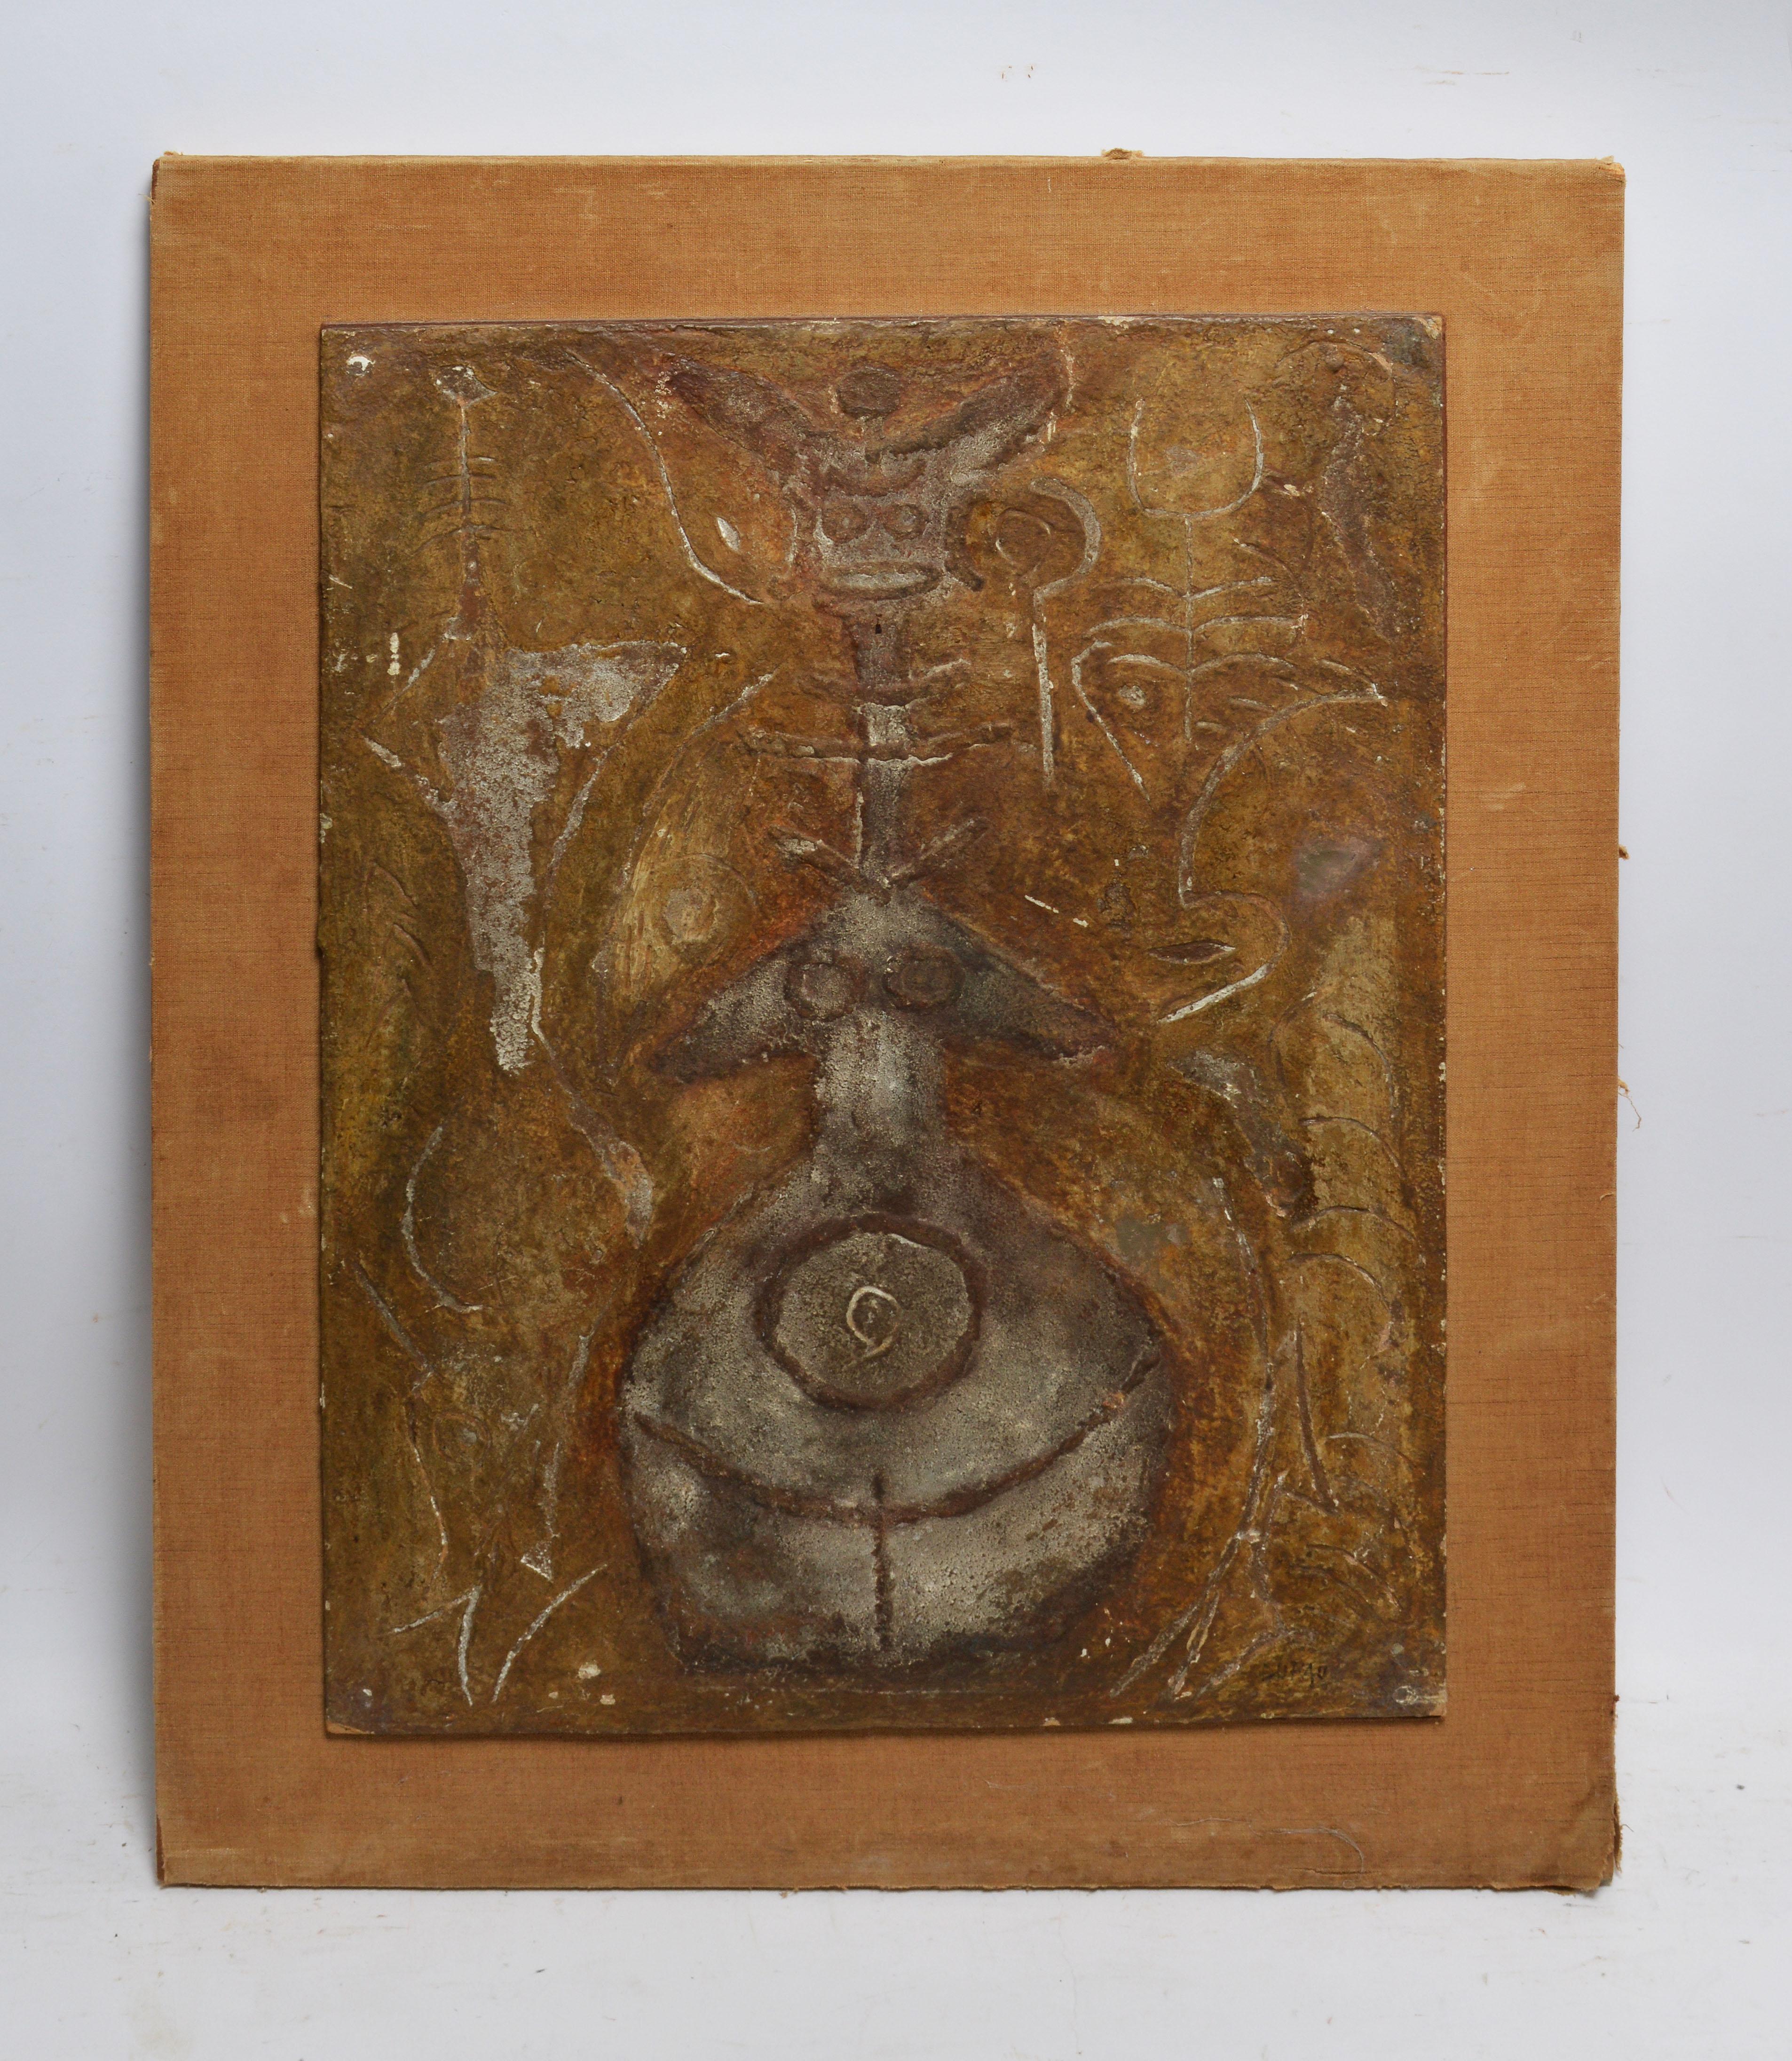 Mixed media wall sculpture by Paul Dufau  (1897 - 1989).  Plaster and mixed media on board, circa 1940.  Signed lower right.  Displayed on a linen board.  Image size, 15